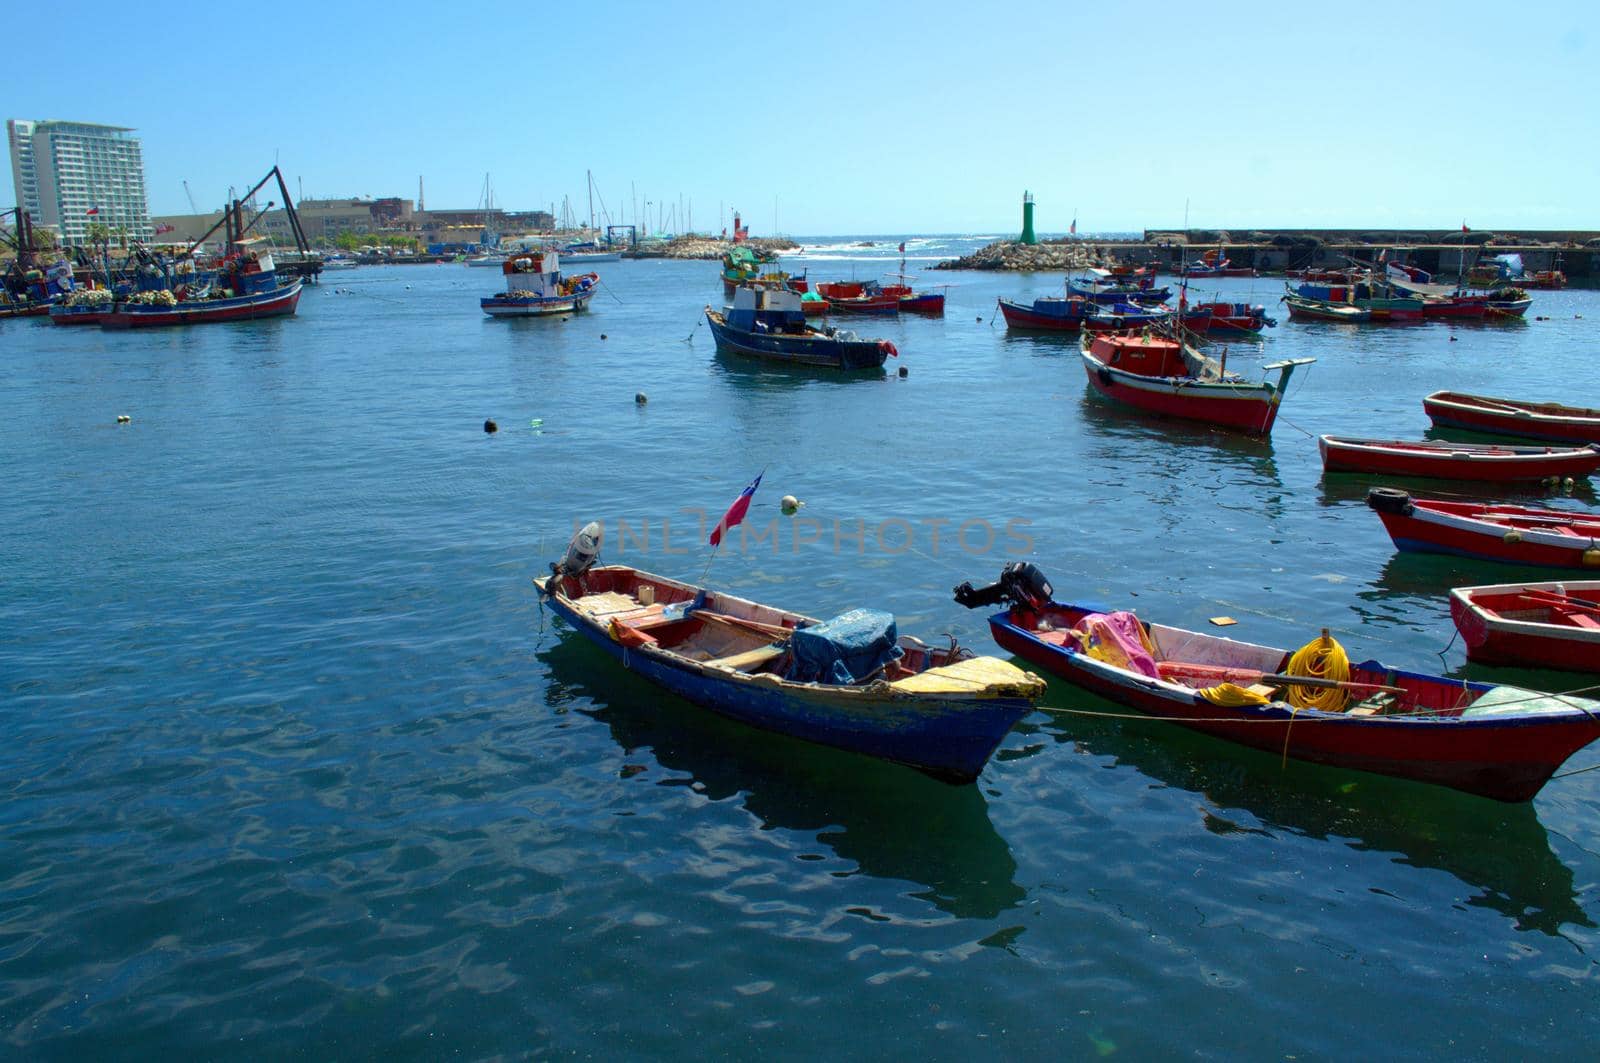 Fishing boats in the harbor of Antofagasta, Chile by hernan_hyper